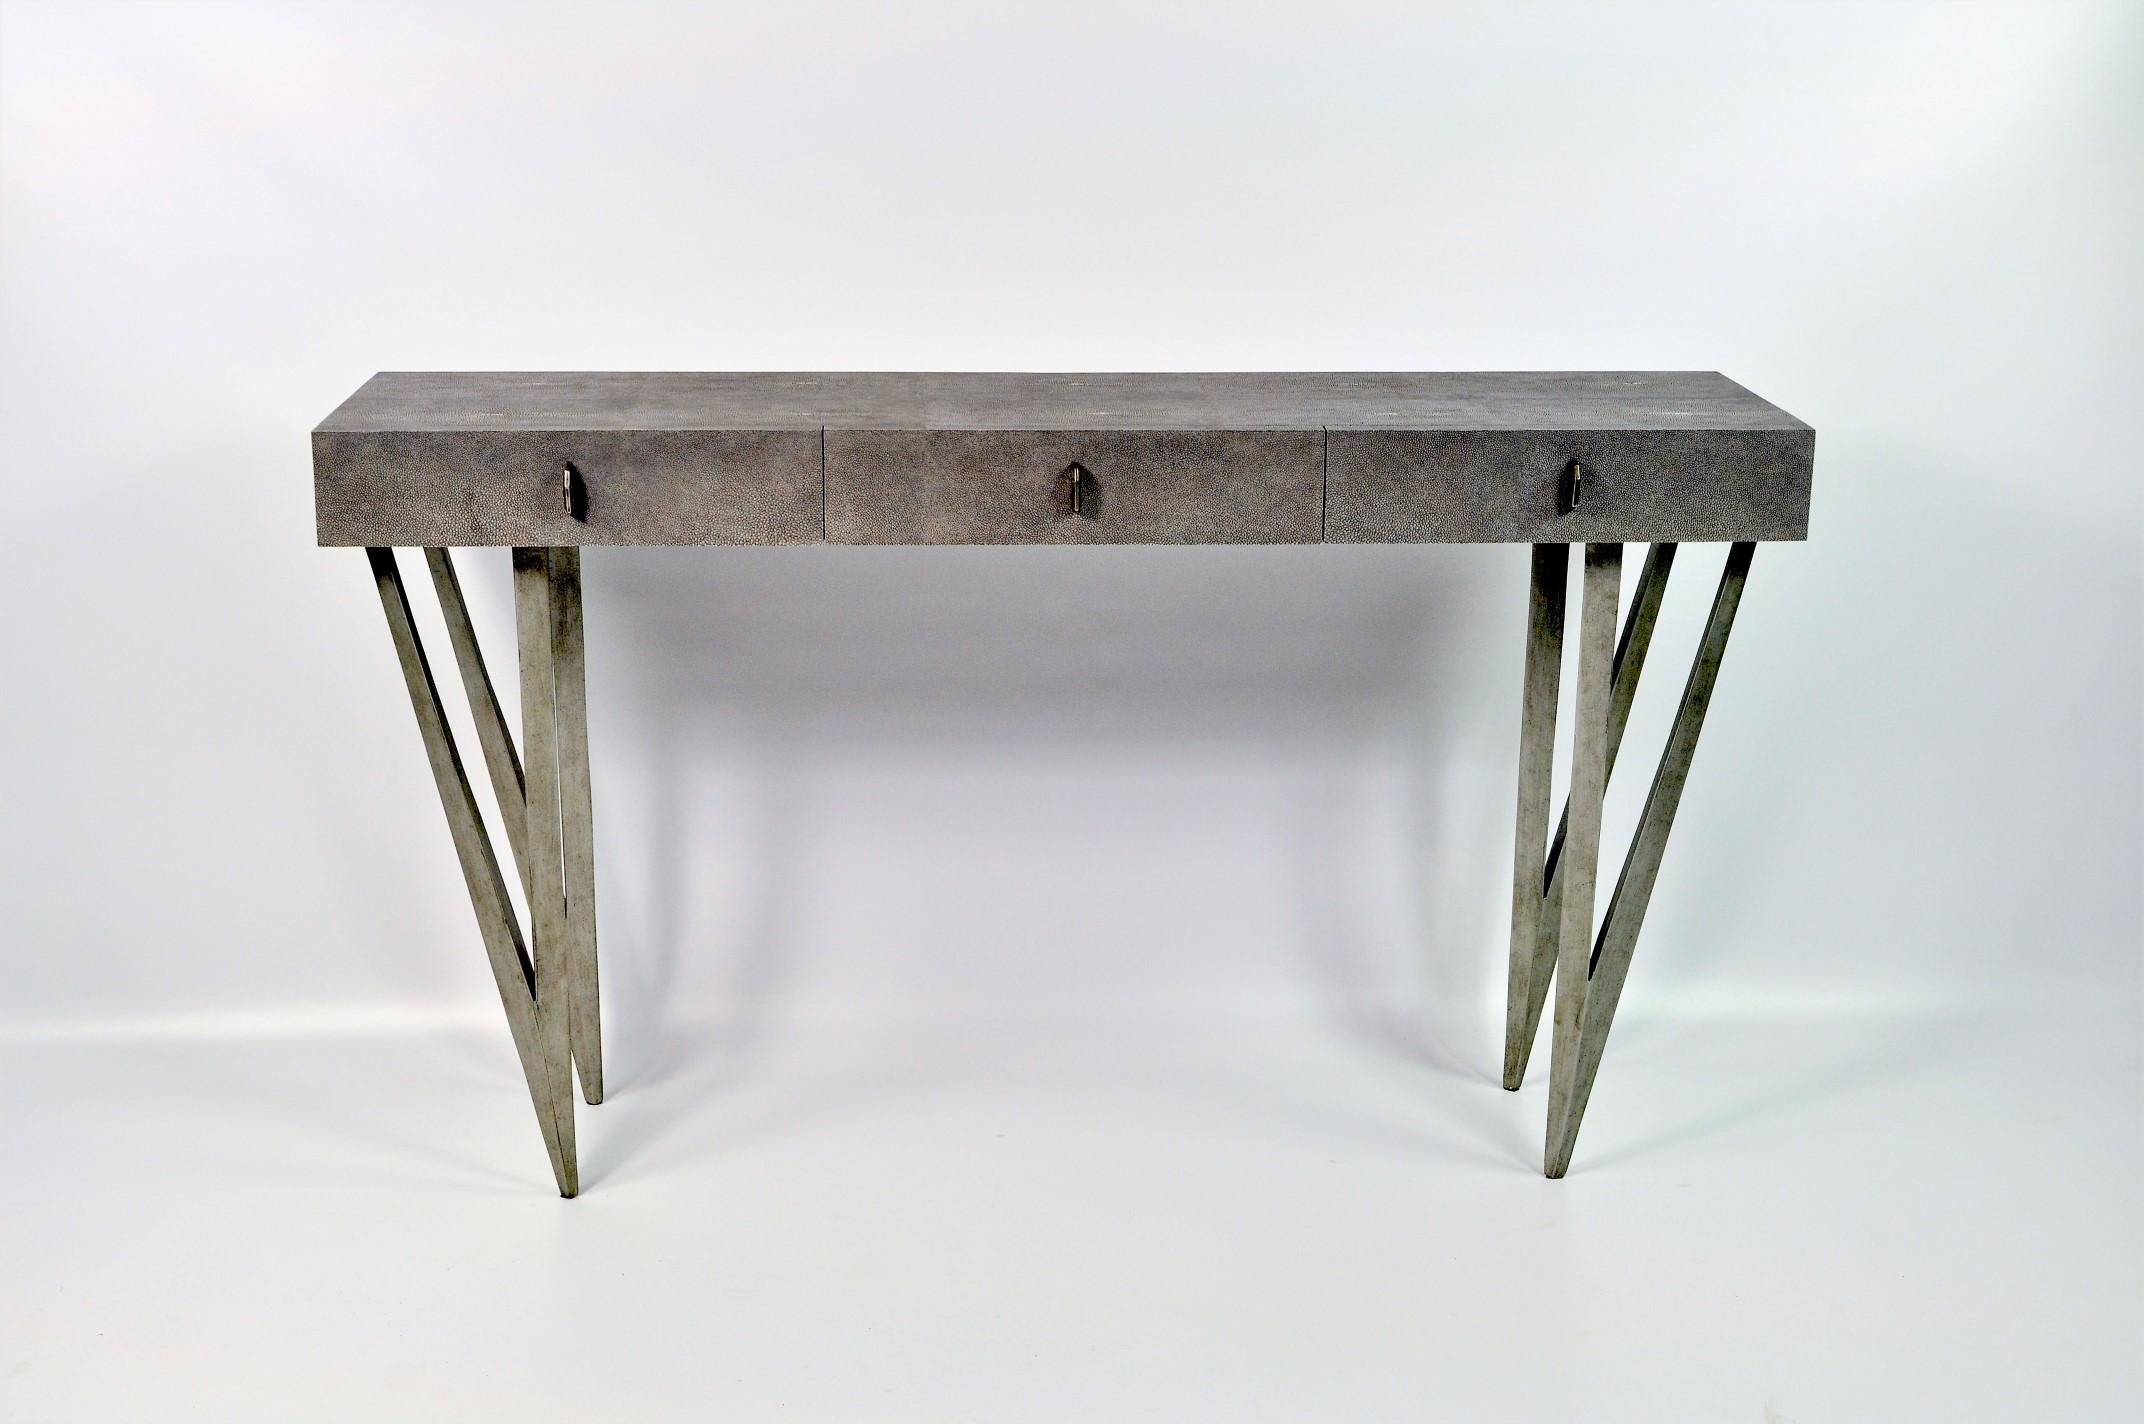 The console table reef is made of dark grey shagreen (our ref CARBON).
It has three drawers and the legs have an old silver patina.
The knobs are made in lost wax cast brass.

This console will settle very well in your entrance or your living